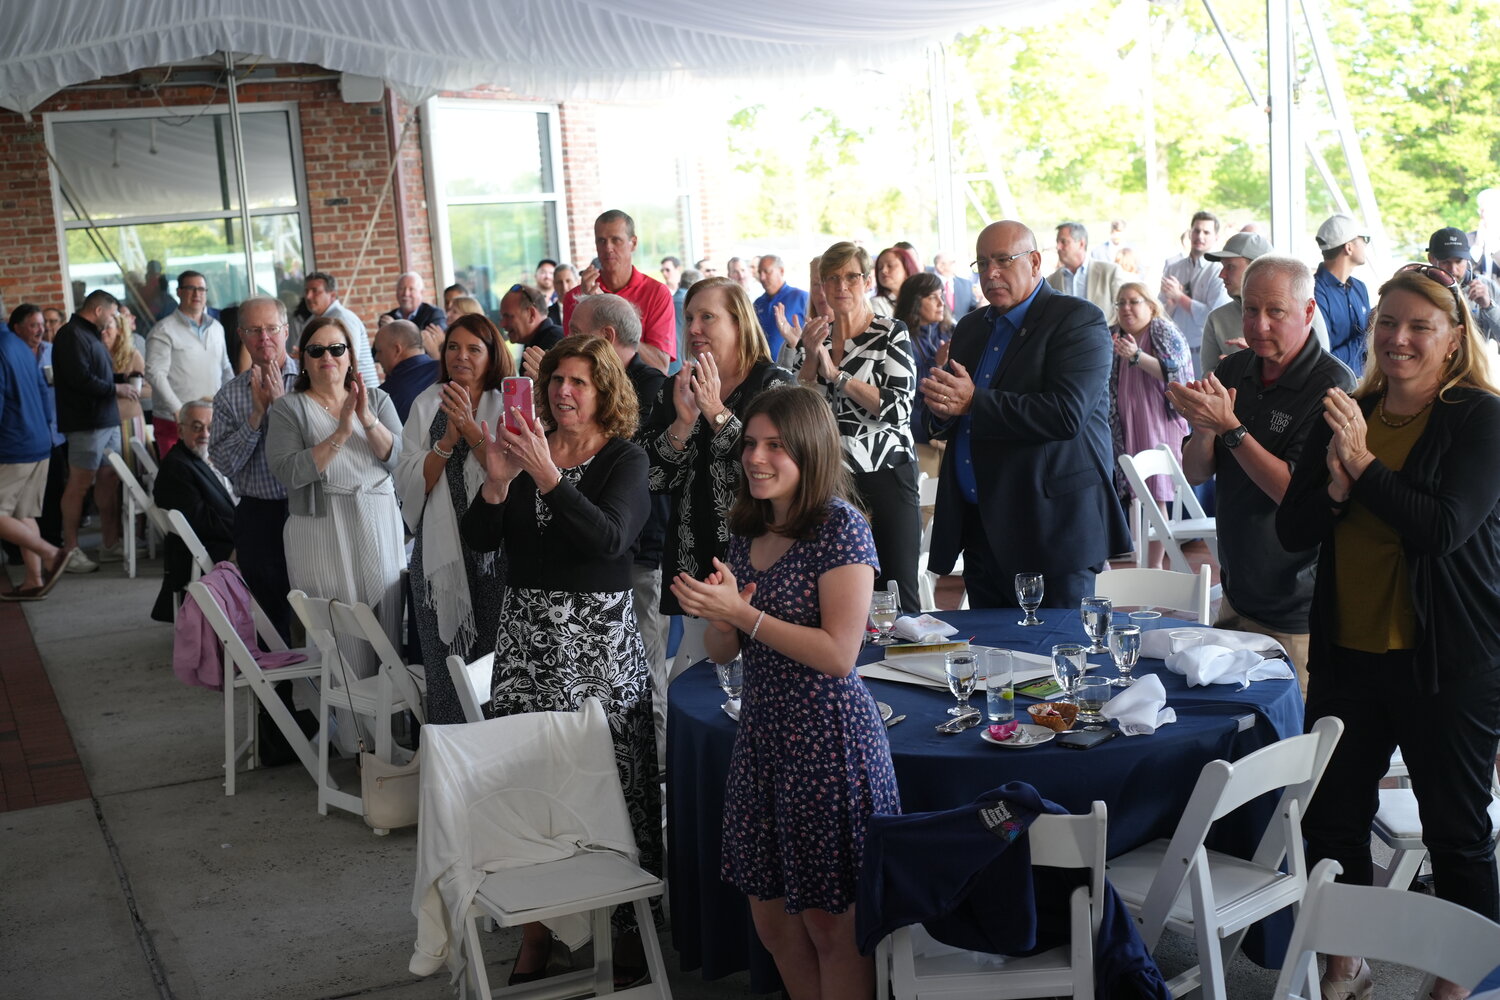 Honorees at the Mount Sinai South Nassau Hospital’s 39th annual golf tournament fundraiser received a warm reception from the crowd.